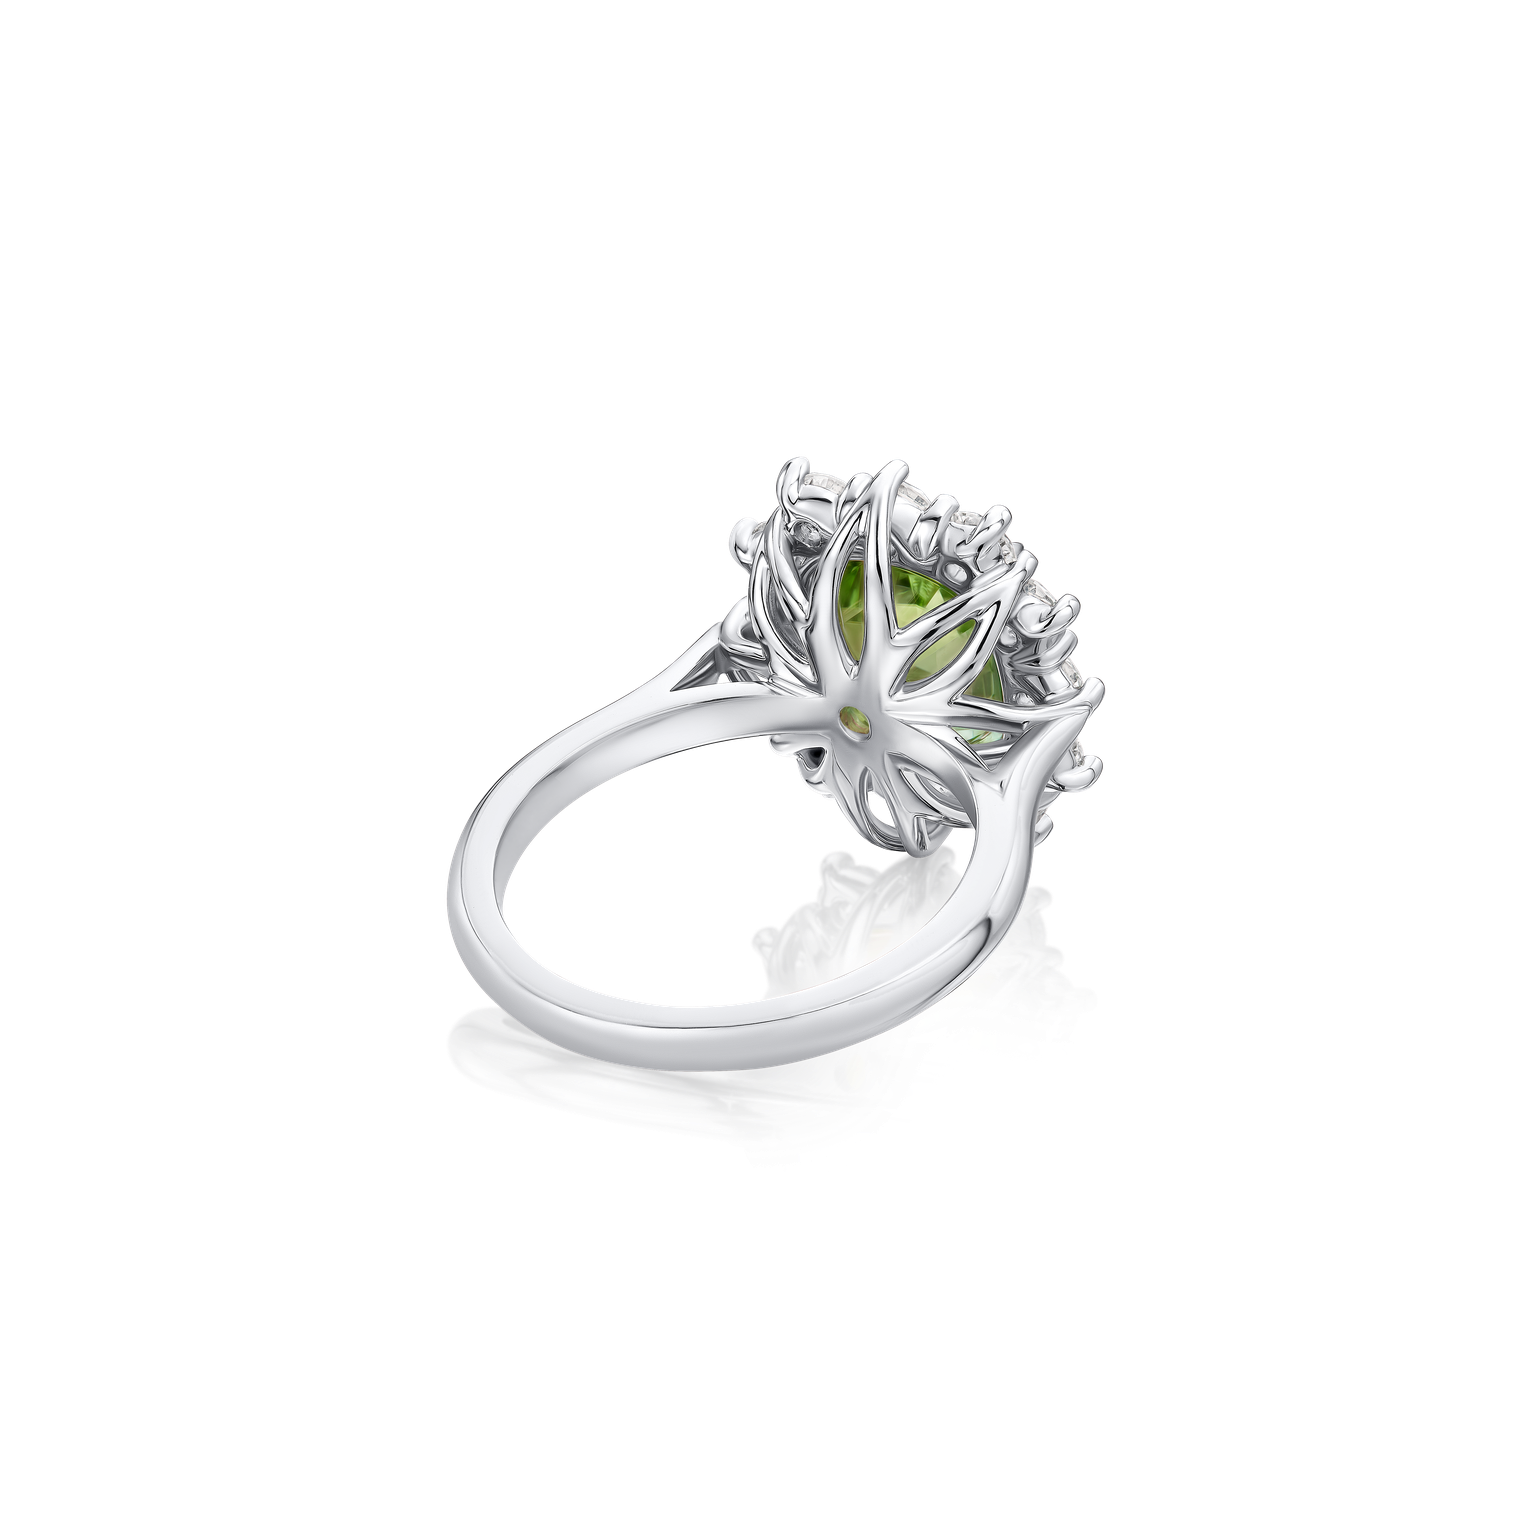 4.08cts Mint Tourmaline and Diamond Ravello Cluster Ring